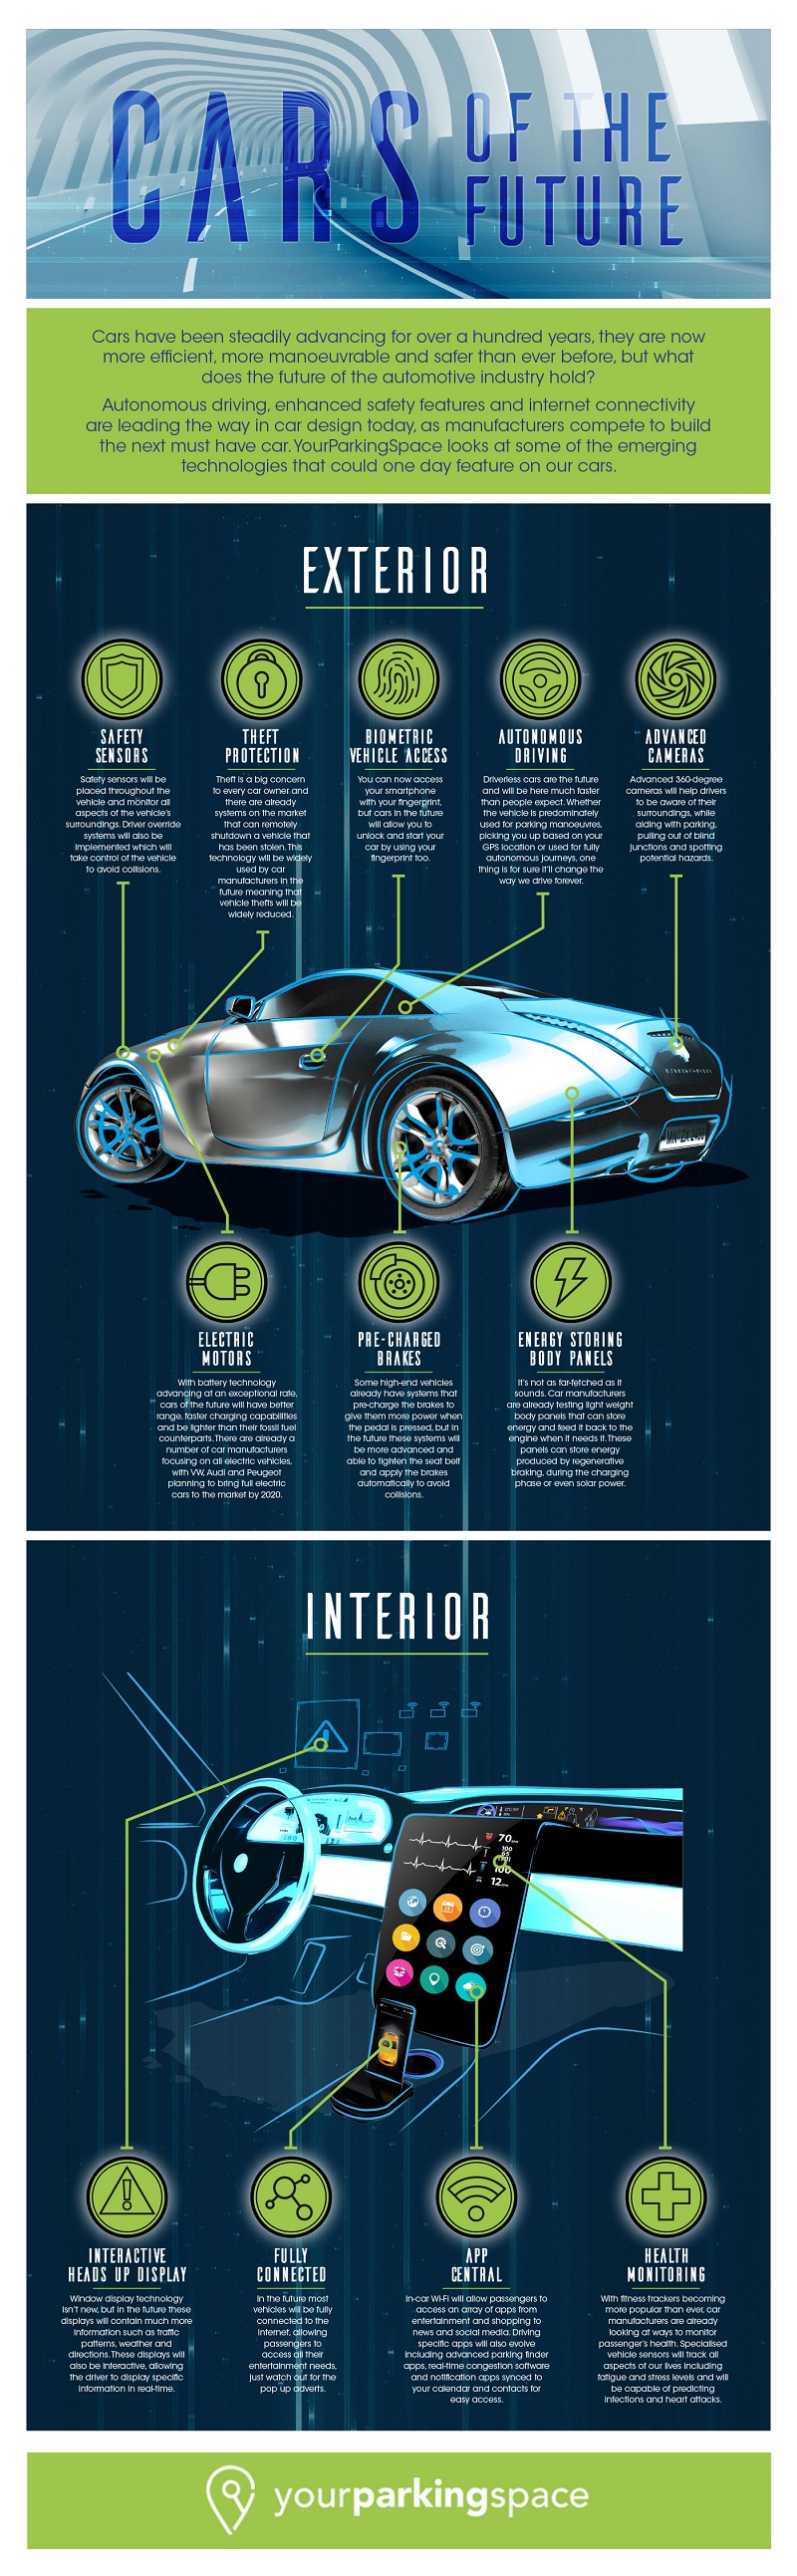 Future Cars Infographic